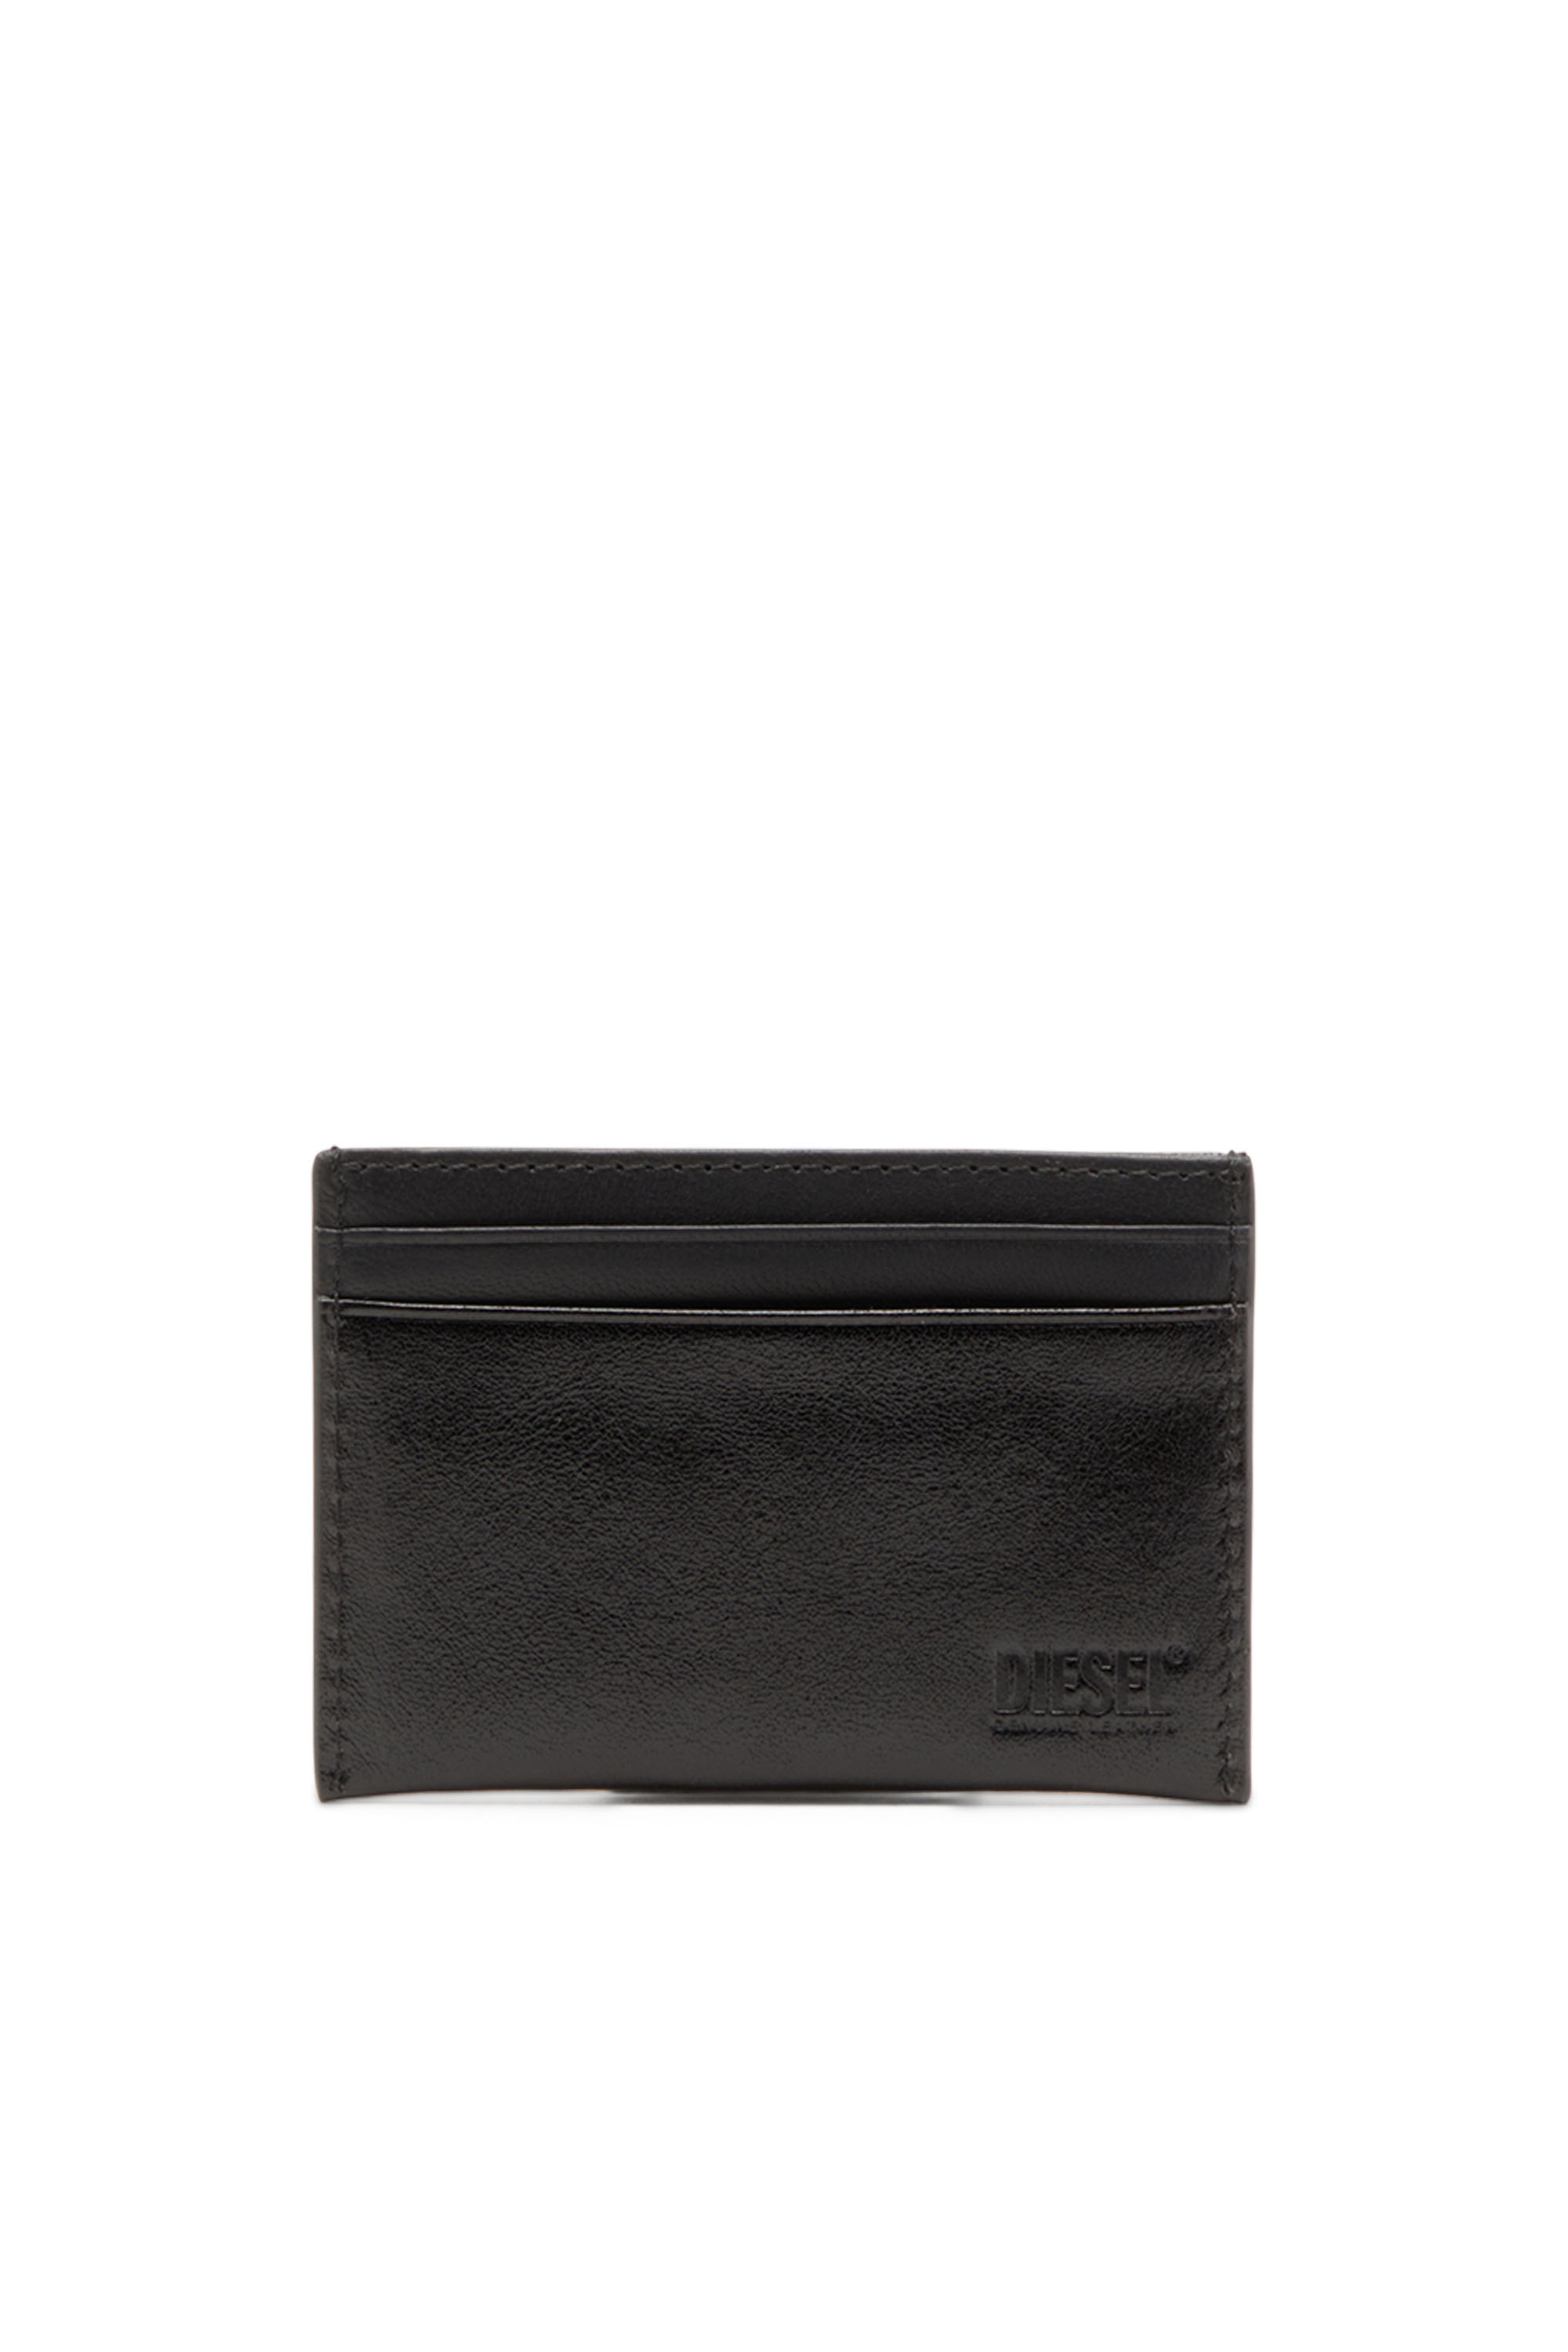 Diesel - RAVE CARD CASE, Male Leather card holder with red D plaque in ブラック - Image 2